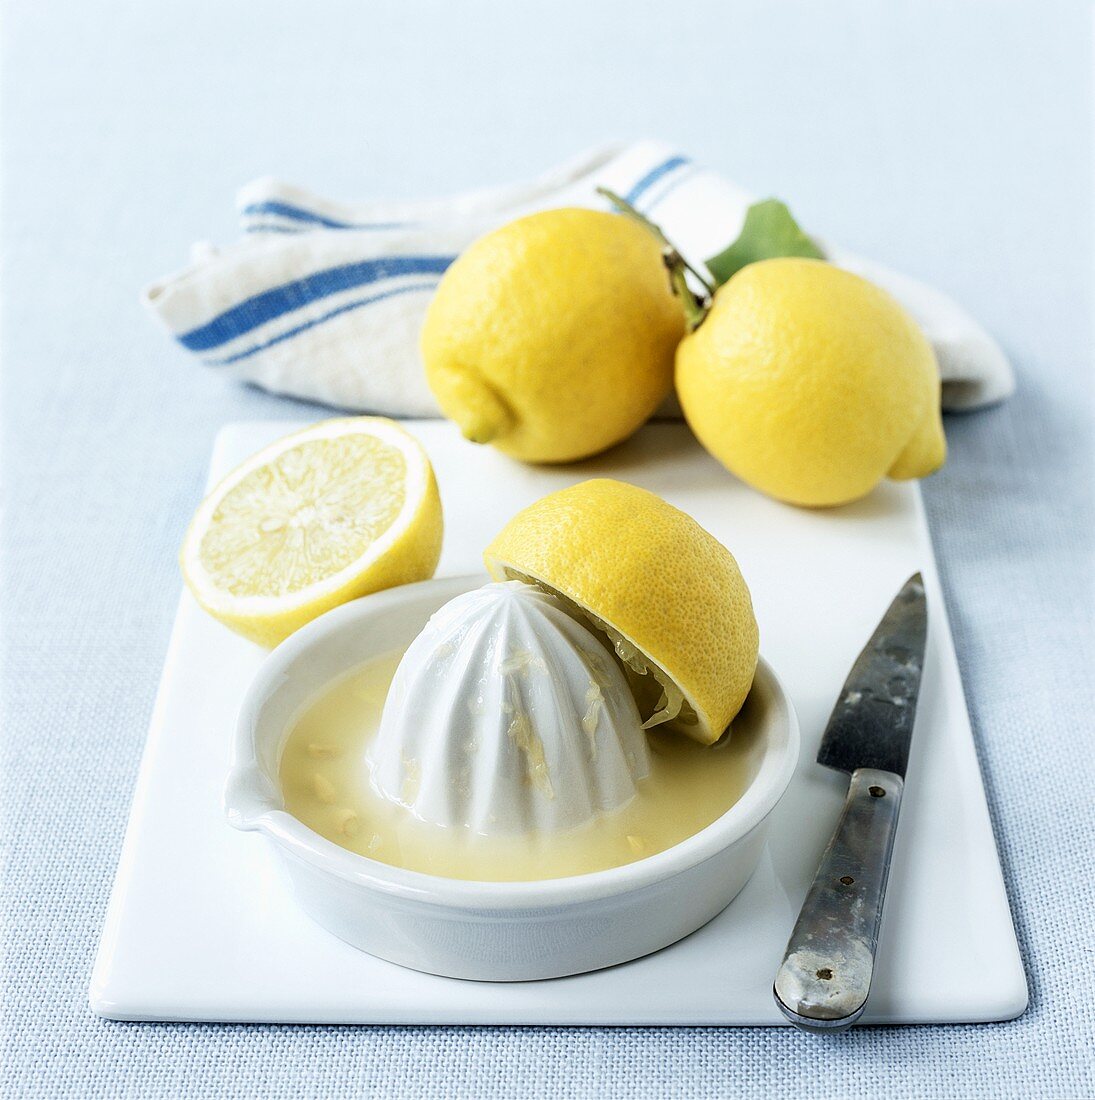 Still life with lemons and lemon squeezer